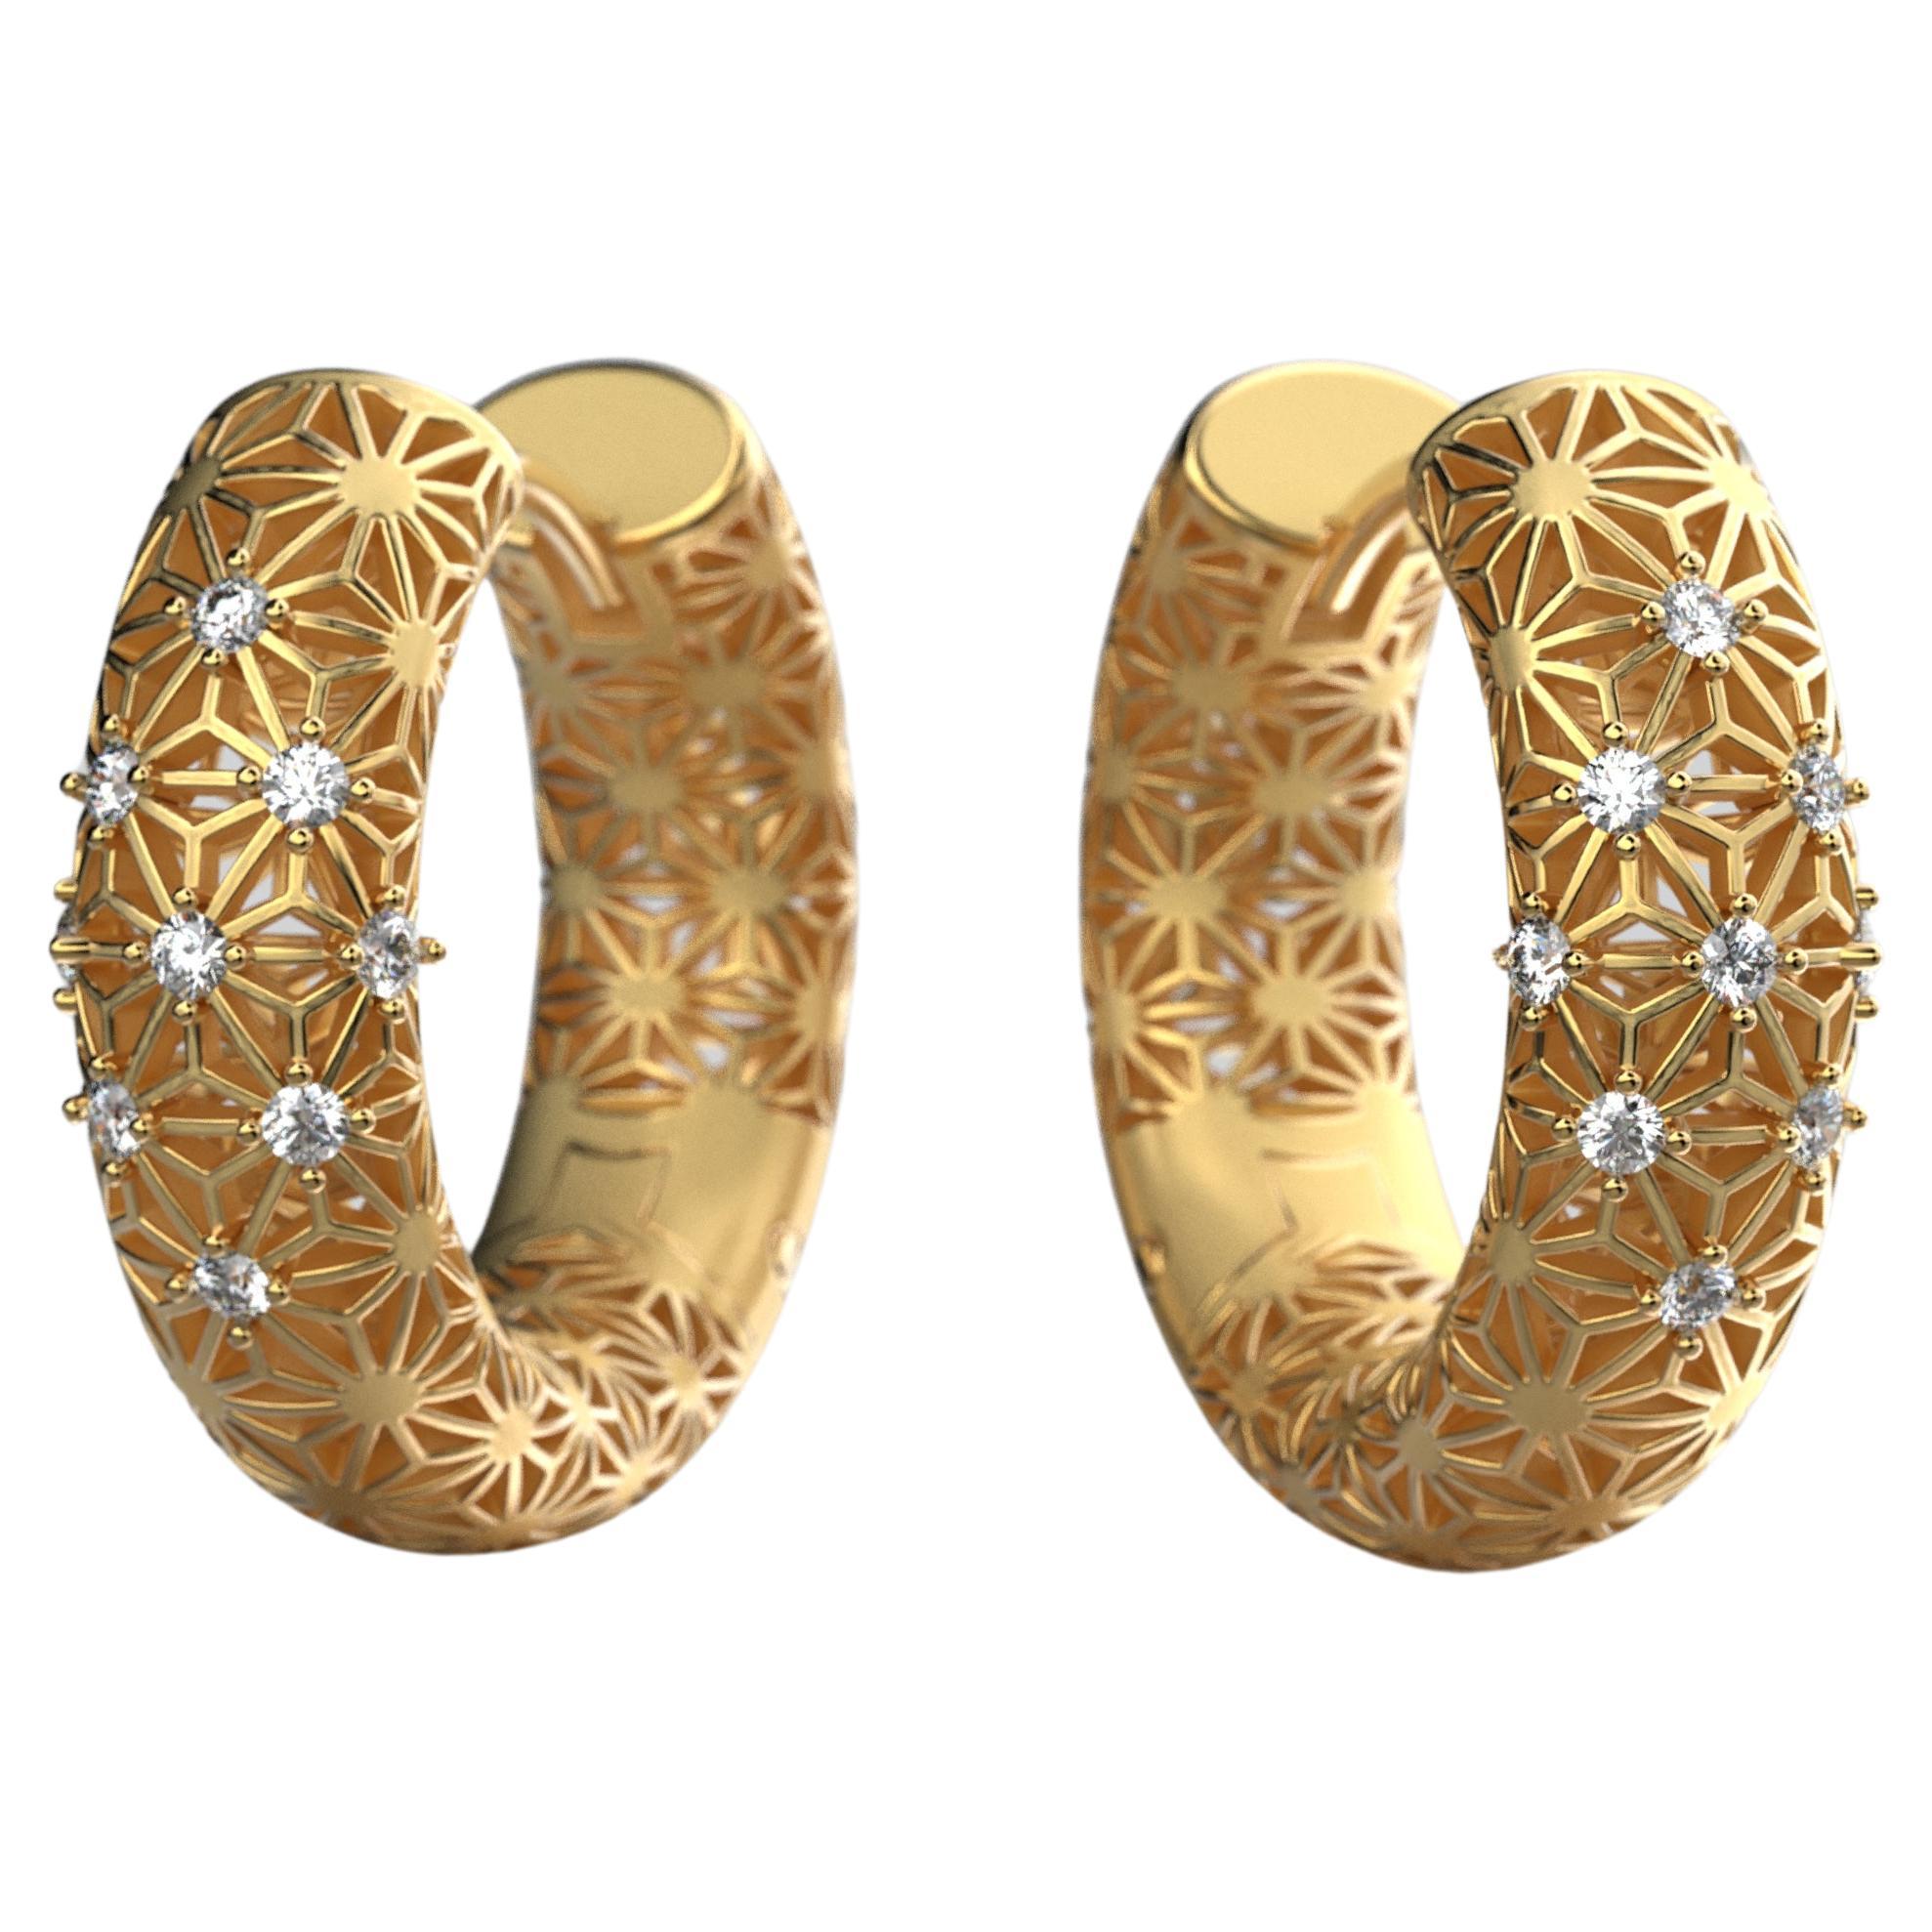 Indulge in the timeless elegance of our made to order Italian Gold Hoop Earrings, where luxury meets tradition in every gleaming detail. Handcrafted with care in Italy, these exquisite hoops are a celebration of sophistication and style.

Each hoop